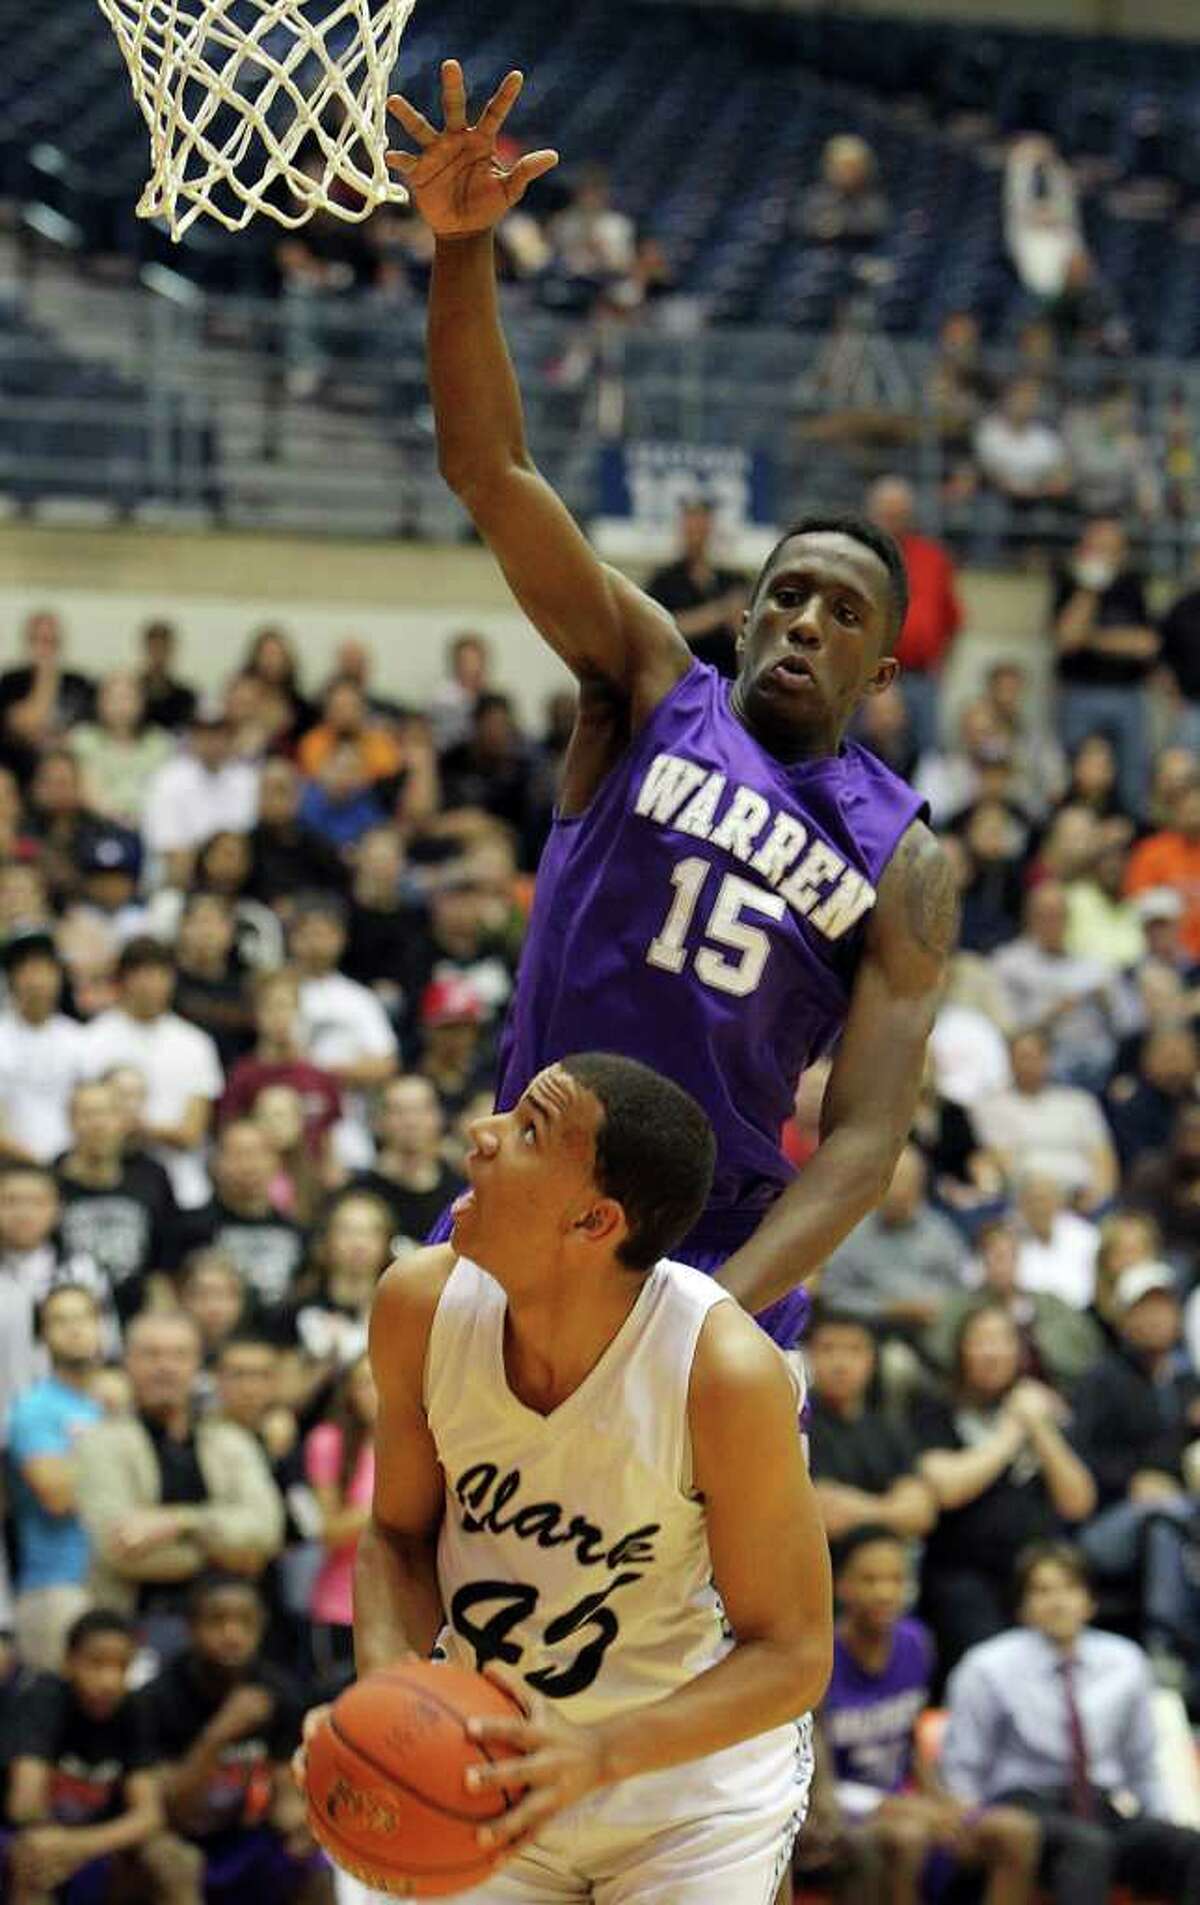 Warren's Taurean Waller-Prince (15) attempts a block on Clark's Shawn Gulley (45) in the Region IV-5A boys basketball finals at UTSA on Saturday, Mar. 3, 2012. Warren defeated Clark, 65-56, to earn a trip to the state tournament.